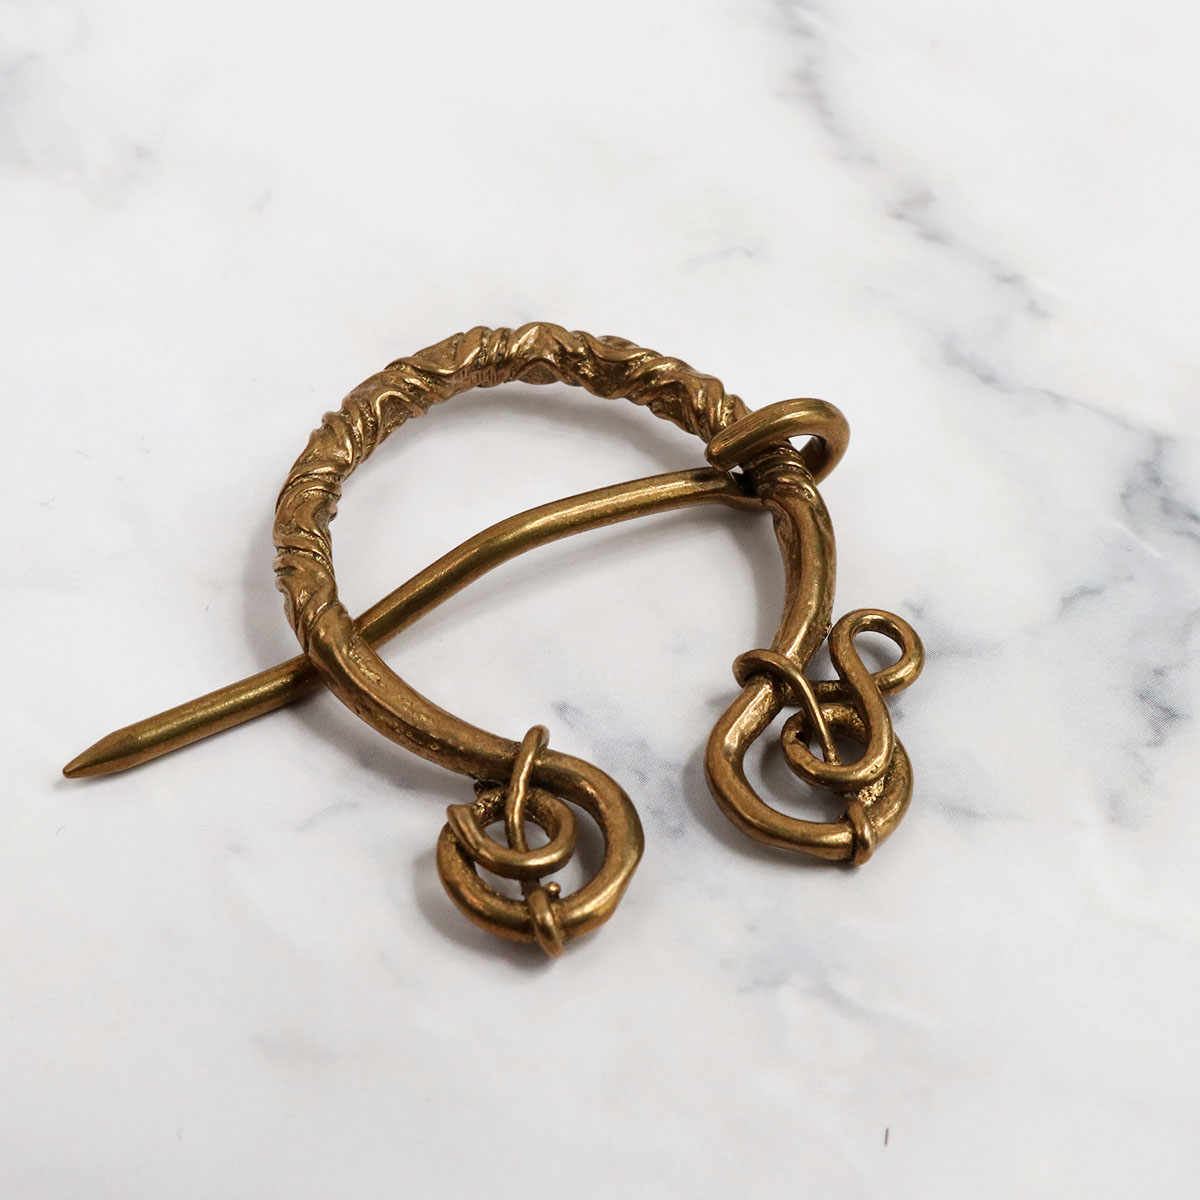 A pair of brass earrings on a marble table with an "Entangled Brass Penannular Brooch".